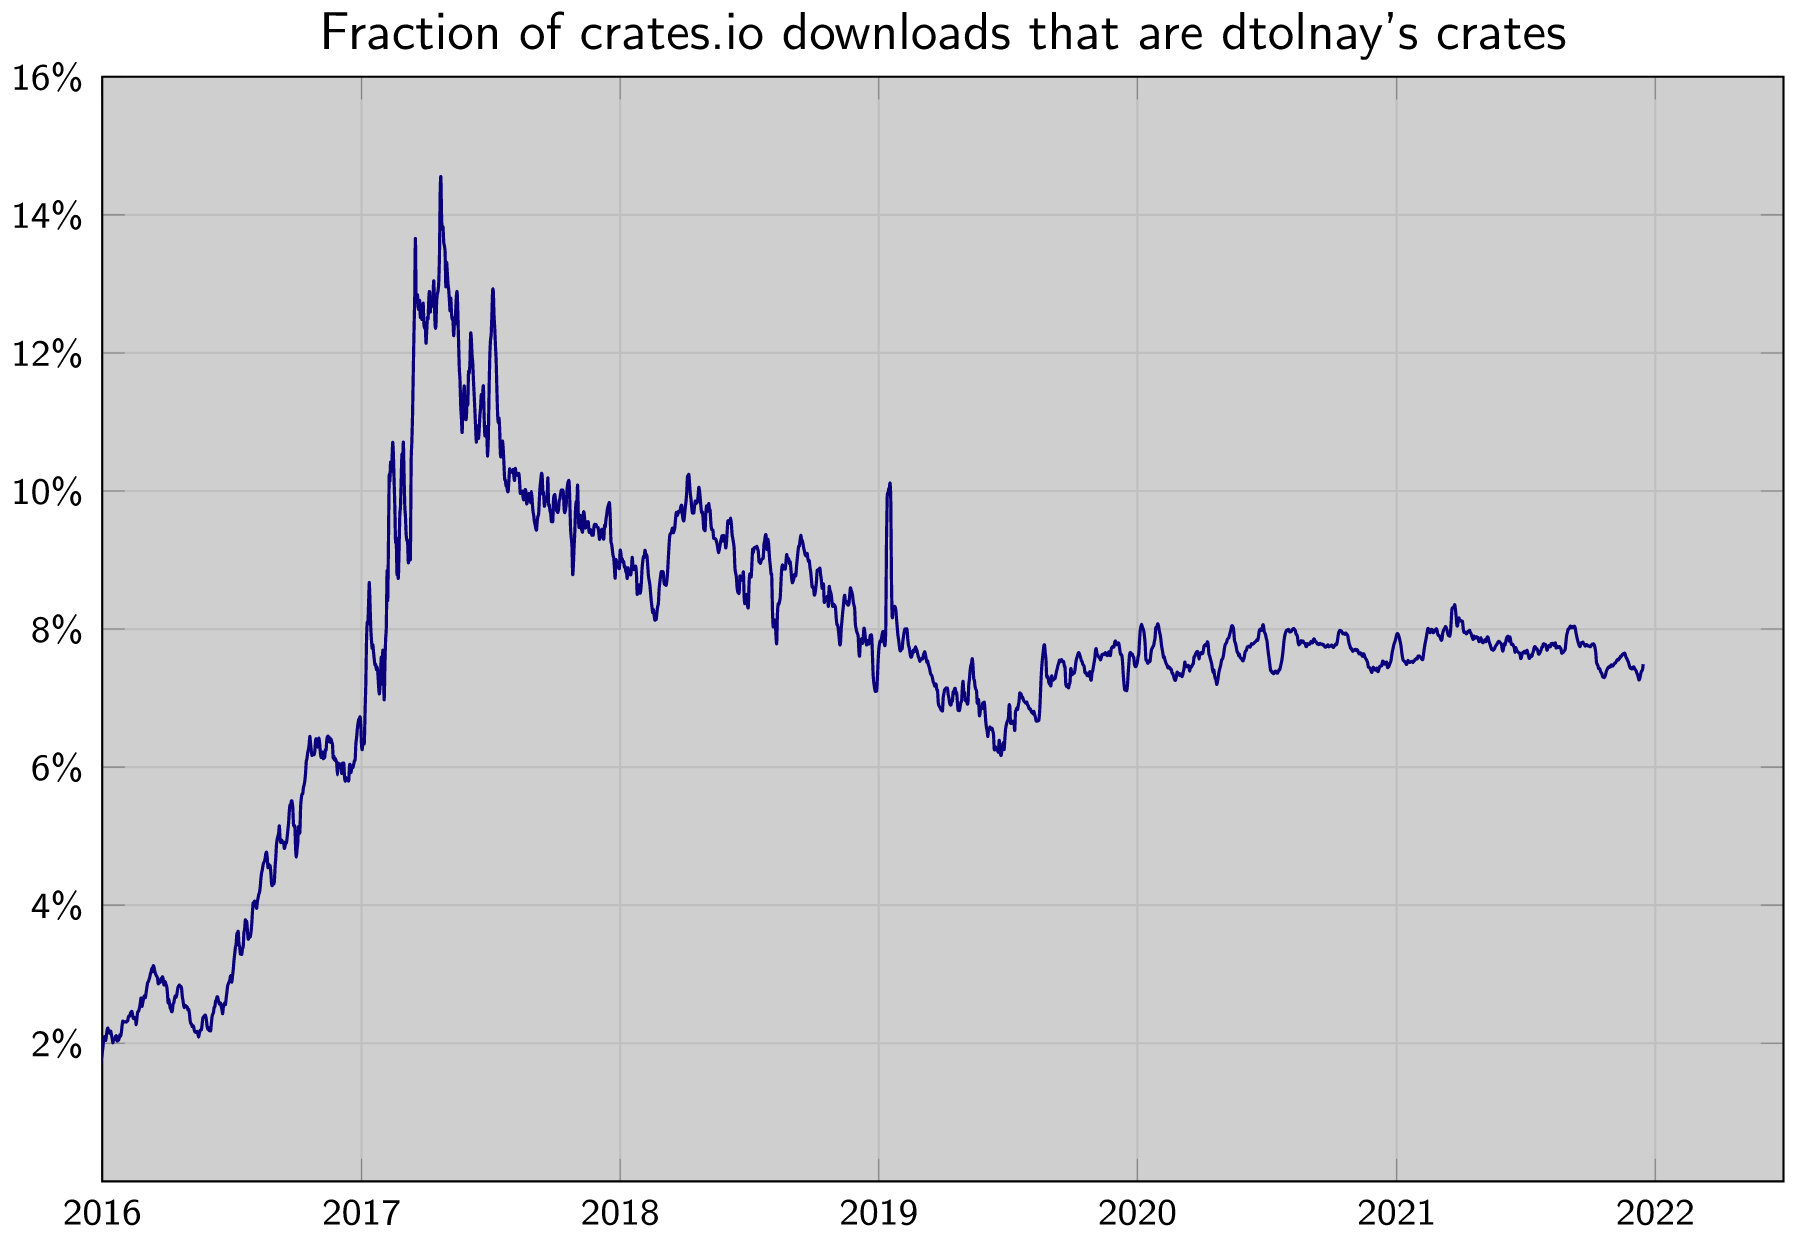 Fraction of crates.io downloads that are dtolnay's crates